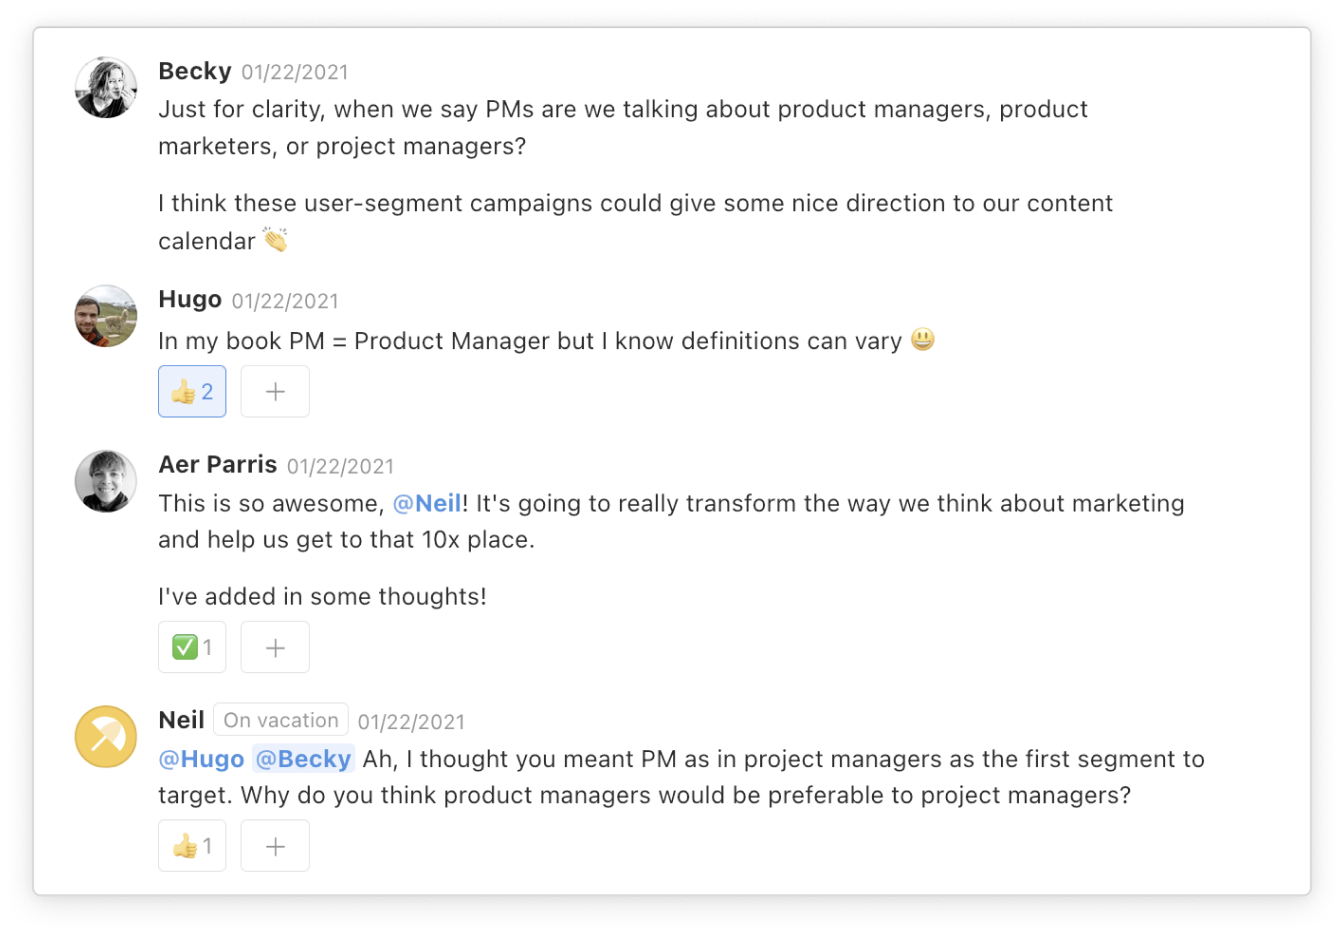 An example of a threaded conversation shows confusion over whether the acronym PM means "product manager" or "project manager." End description.